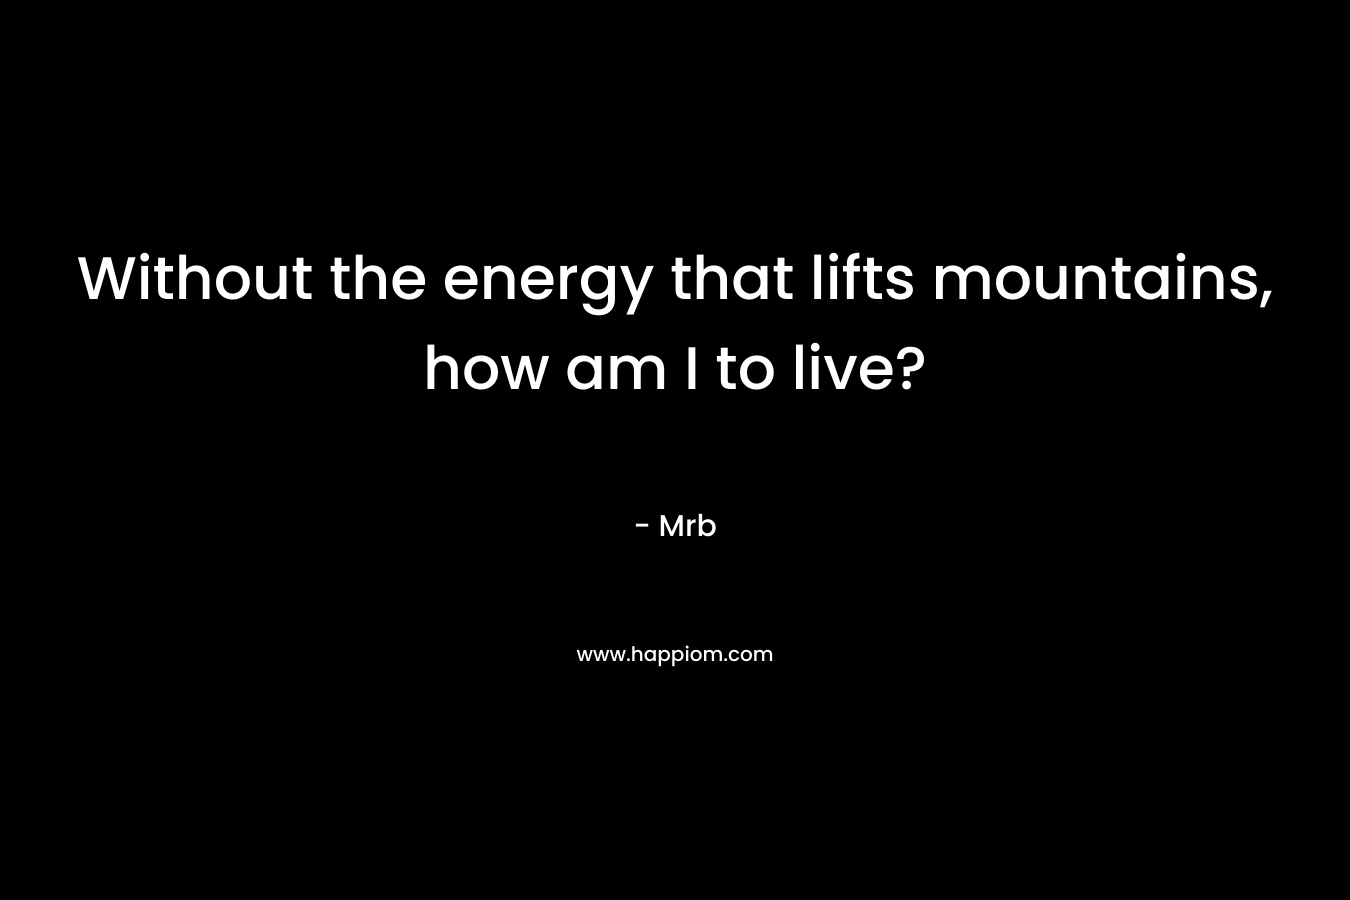 Without the energy that lifts mountains, how am I to live?